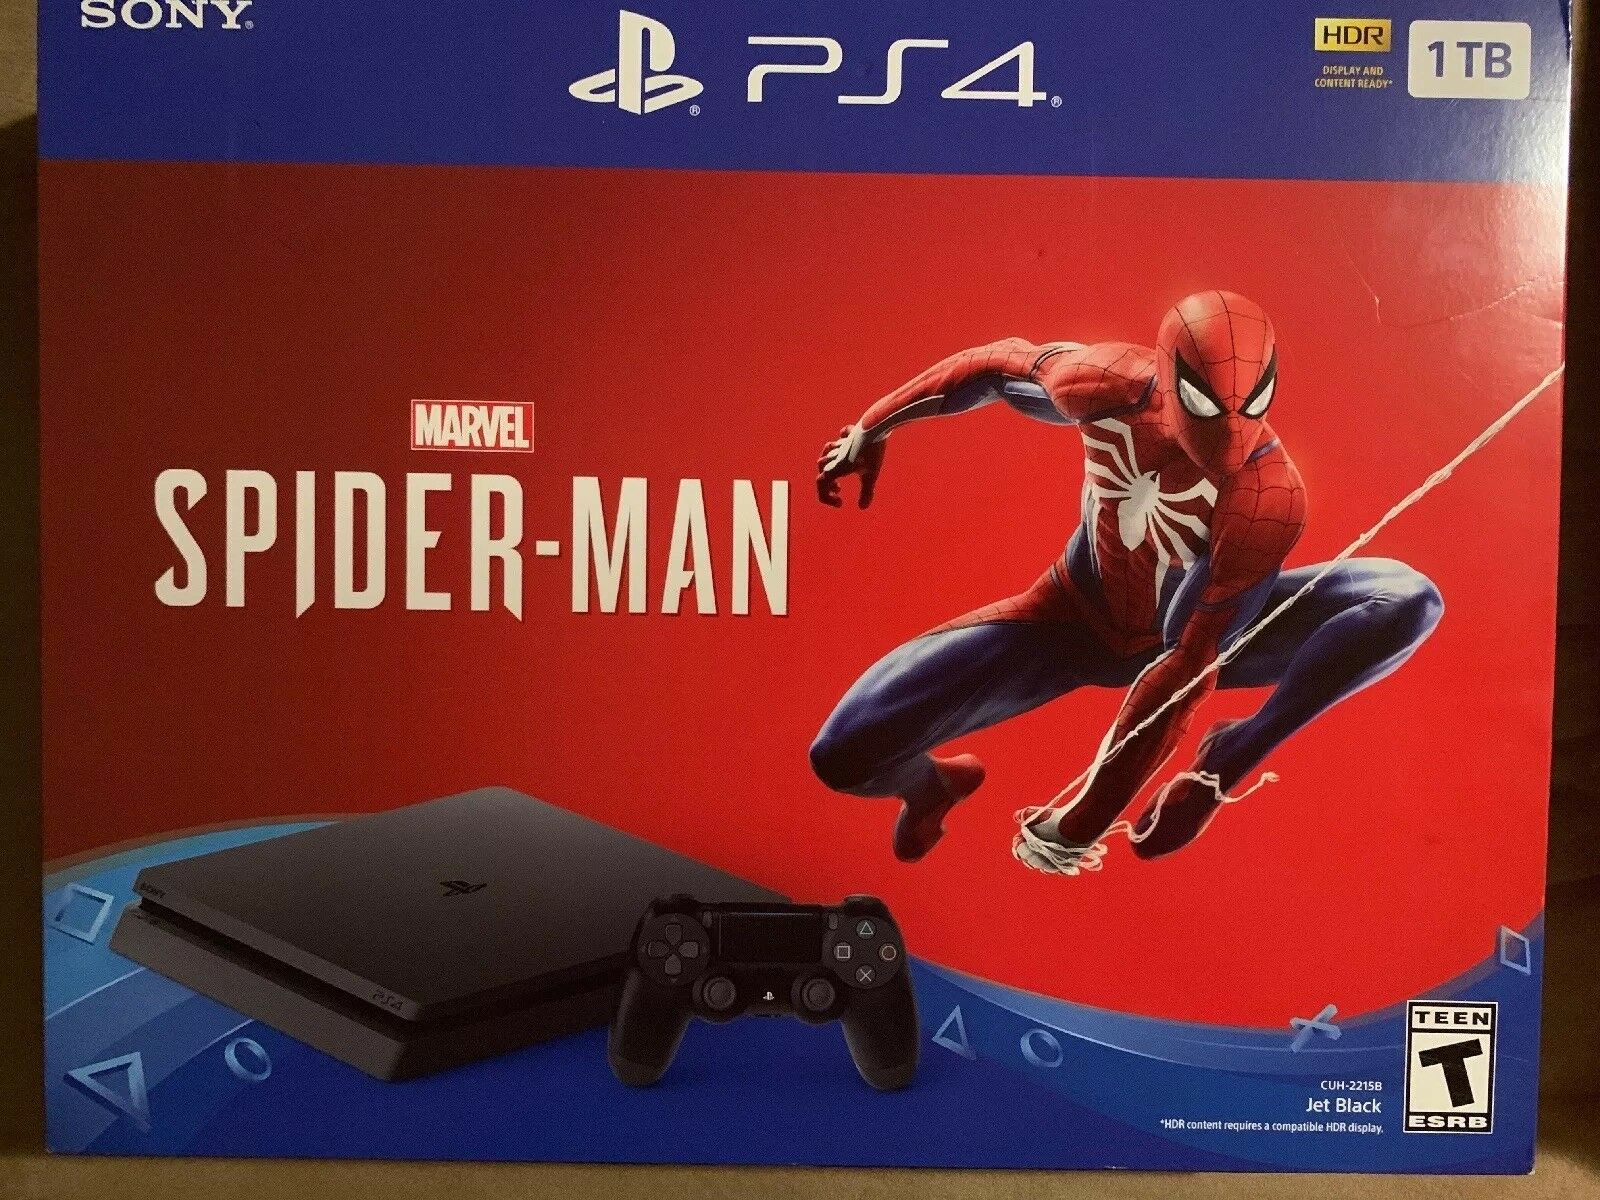 Ps4 Spiderman Console Wallpapers